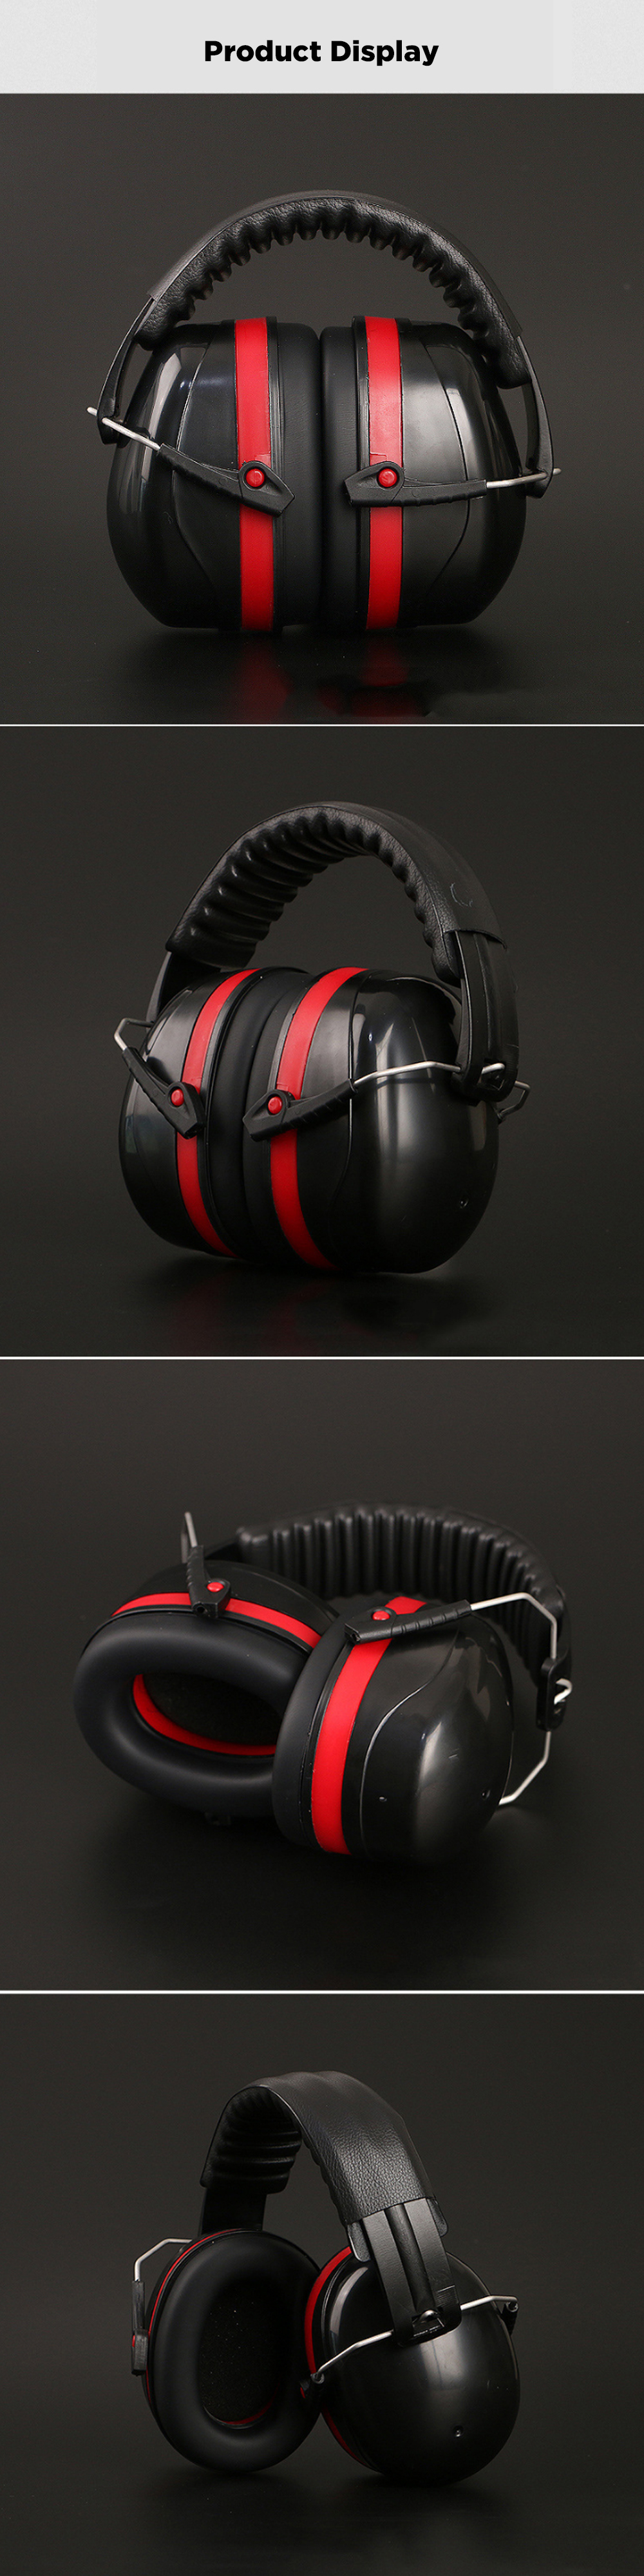 SNR-105dB-Electronic-Shooting-Earmuff-Noise-Reduction-Ear-Protection-Safety-Ear-Muffs-for-Hunting-Sh-1703550-3